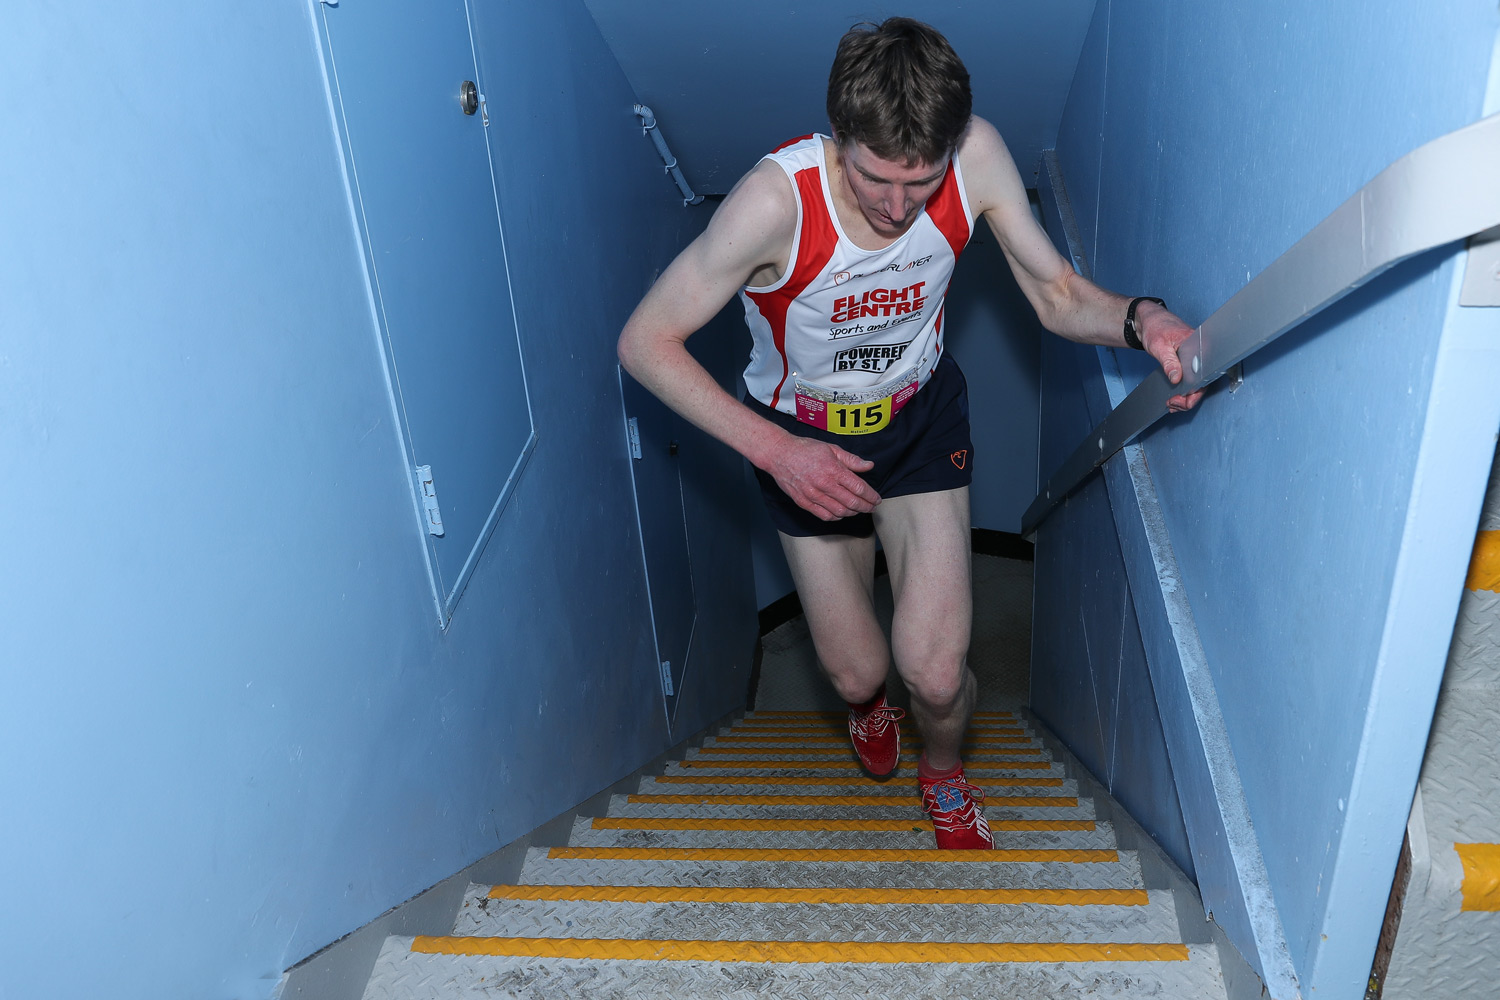 Mark Bourne on his way to victory at Sydney Tower Stair Challenge.